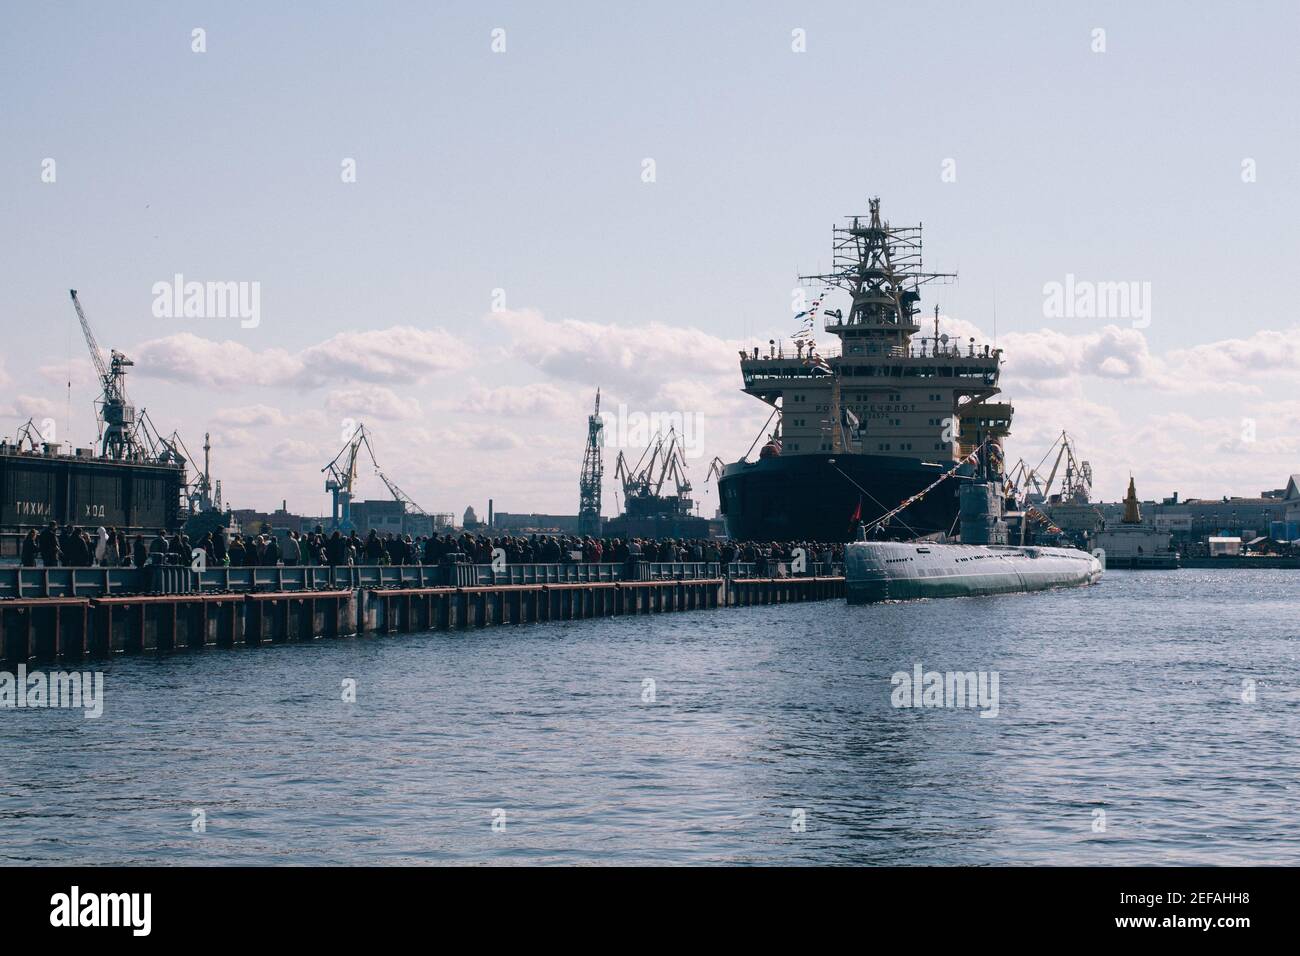 SAINT PETERSBURG, RUSSIA - May 01, 2019: The sea port of Saint Petersburg with containers, old vessels and equipment in the bay, Russia Stock Photo